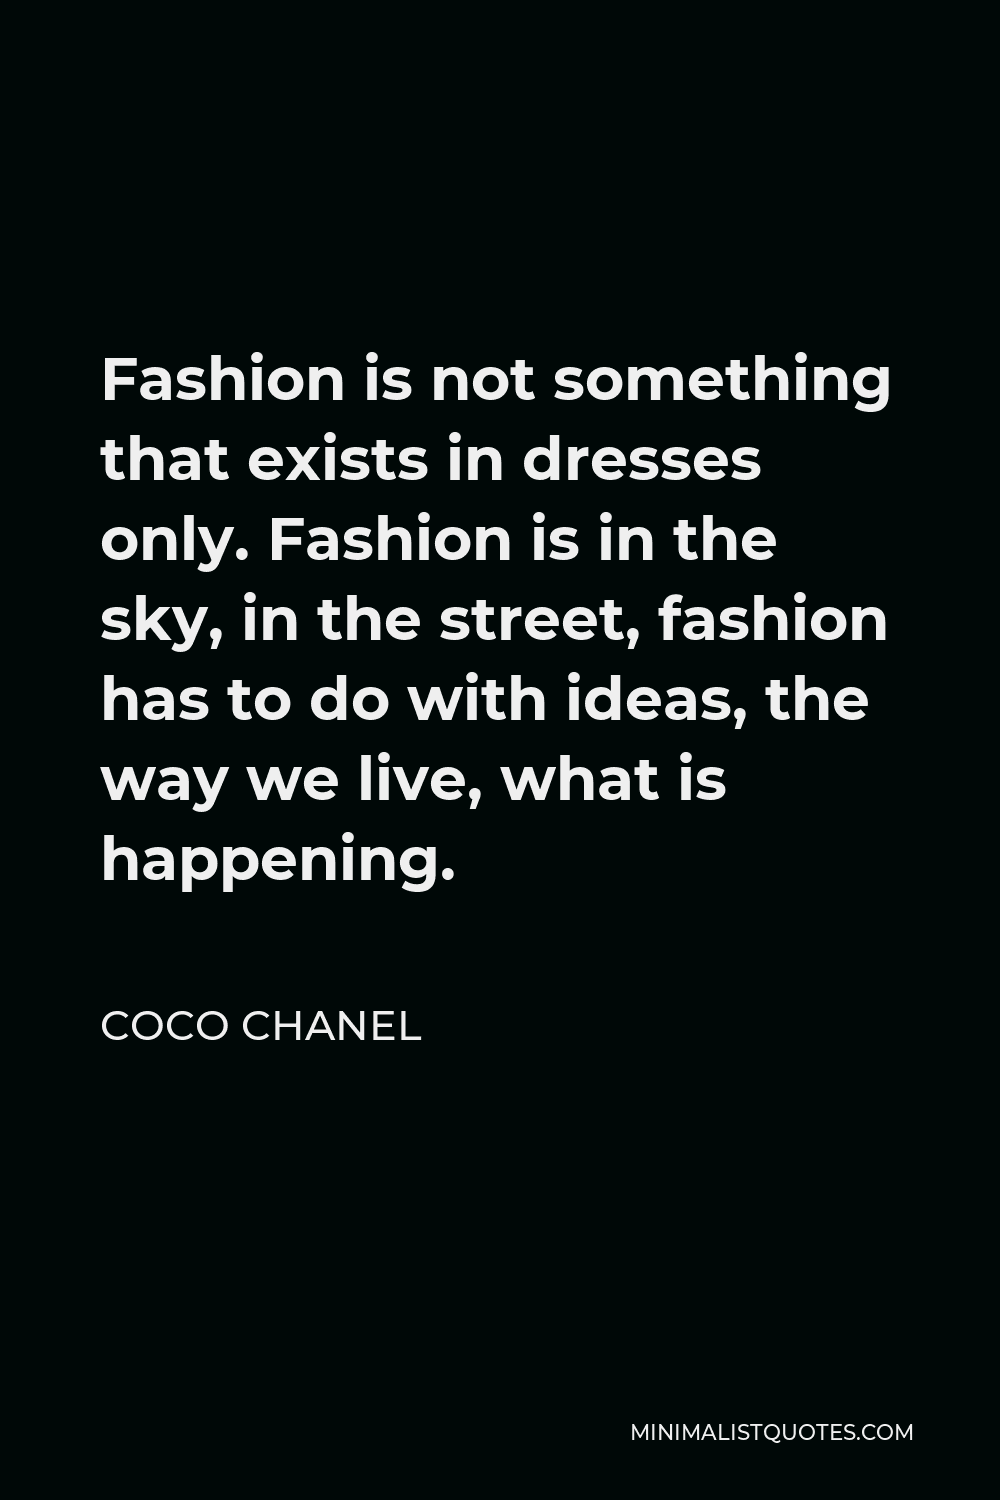 47 of the Best Coco Chanel Quotes About Fashion Life  Luxury  Coco  chanel quotes Chanel quotes Fashion quotes inspirational